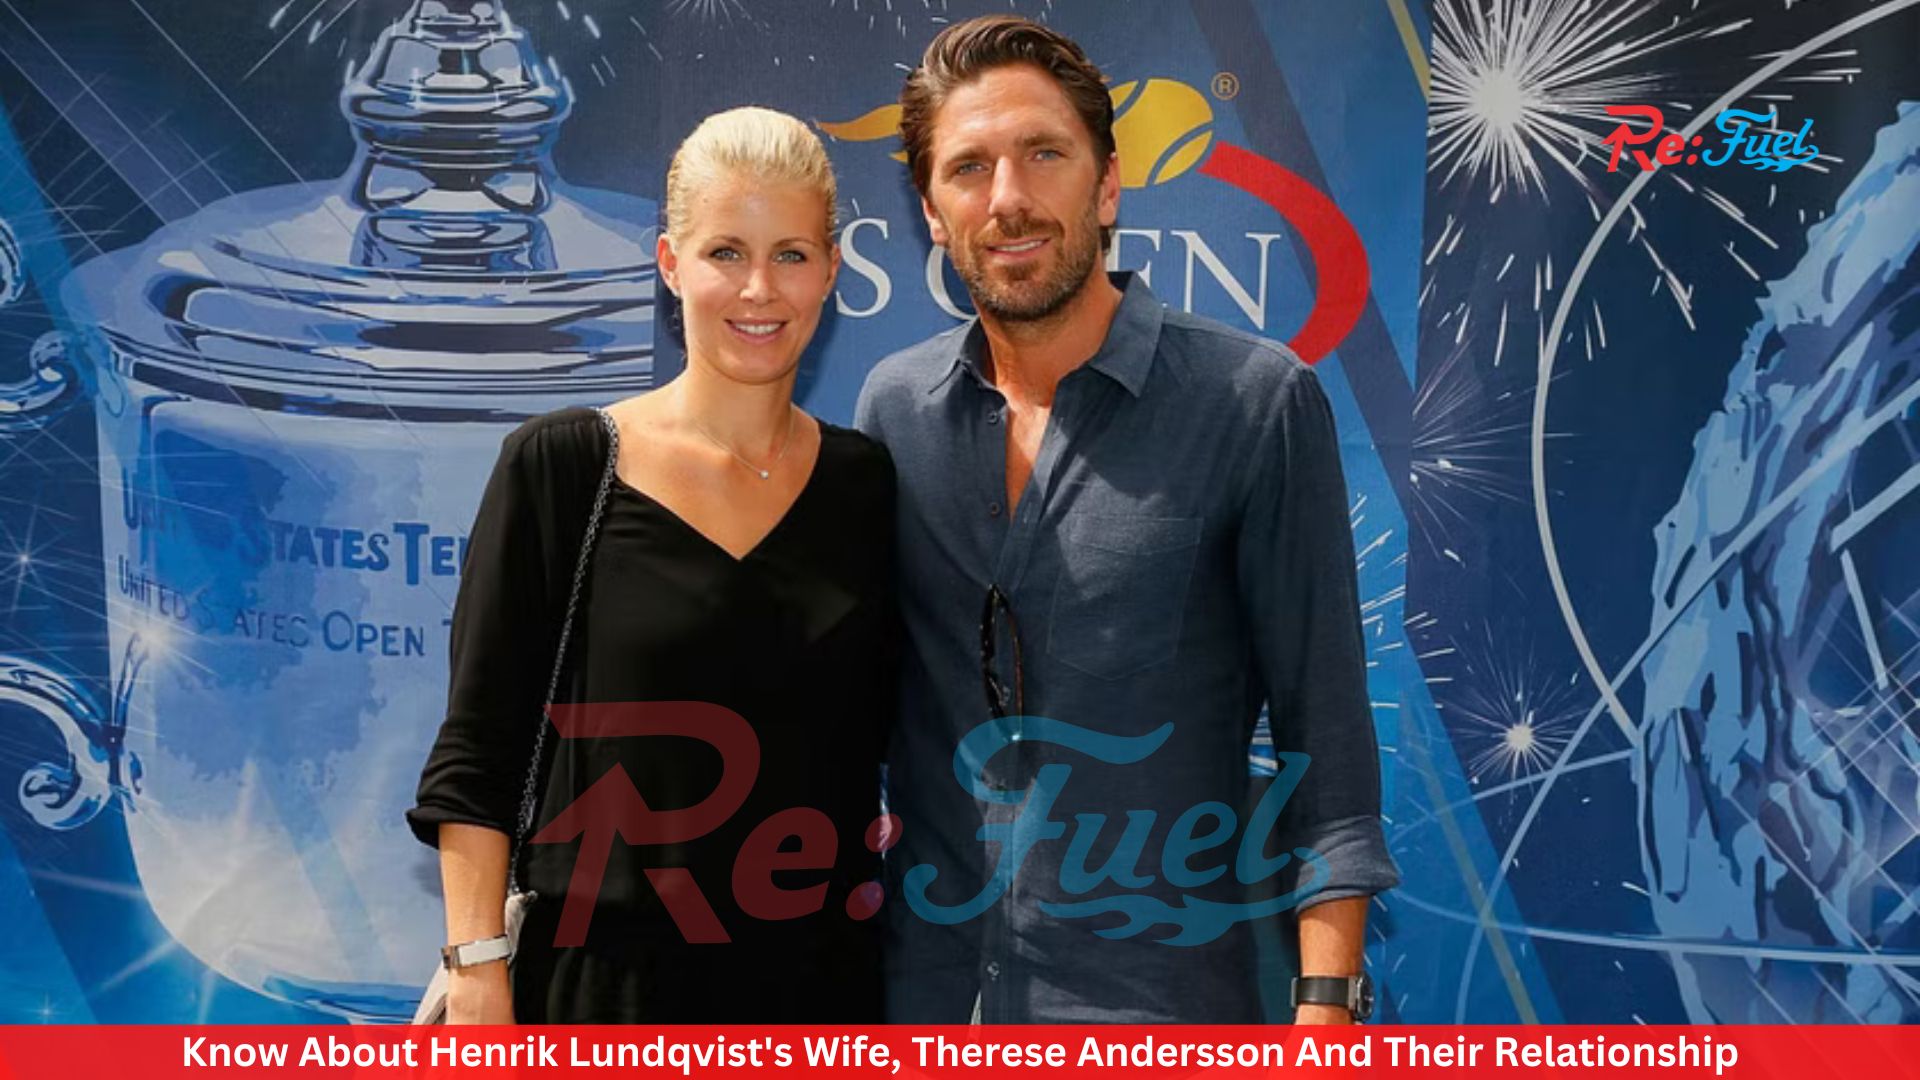 Know About Henrik Lundqvist's Wife, Therese Andersson And Their Relationship